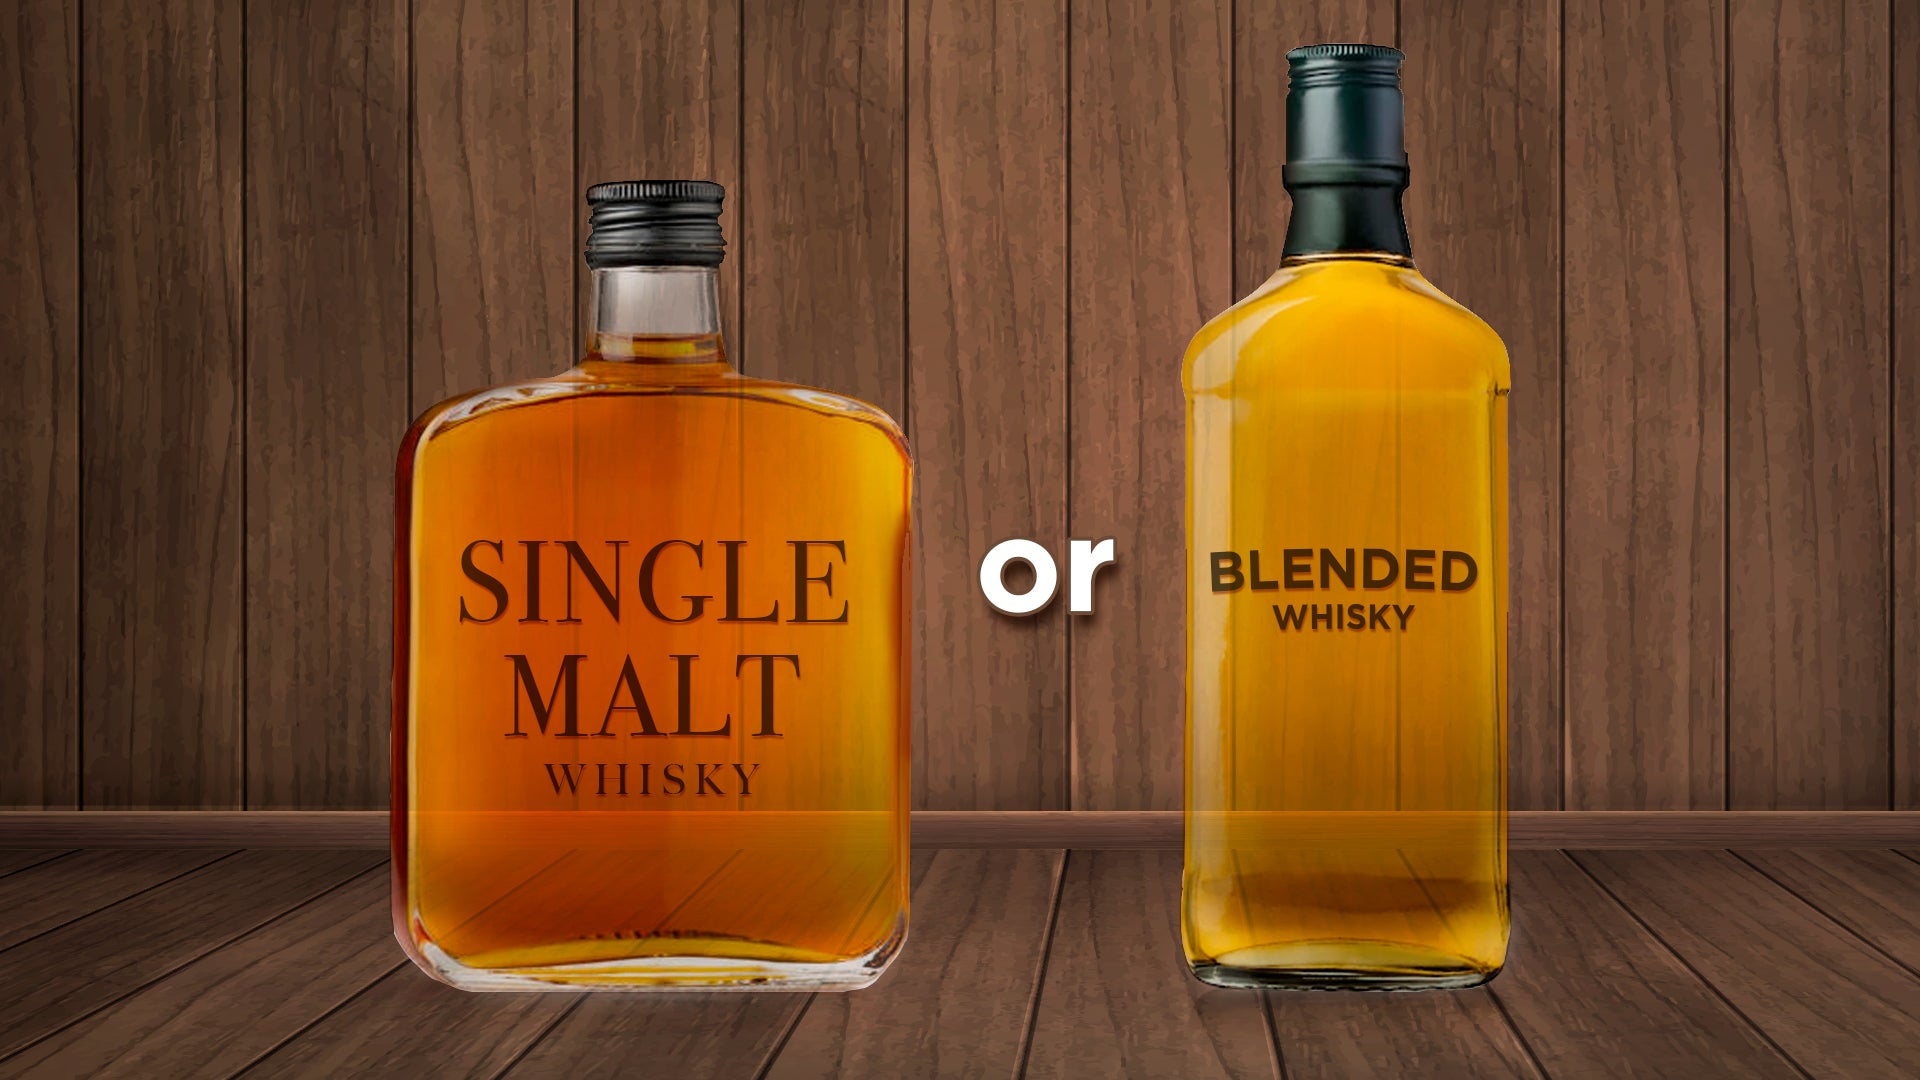 Single Malt and Blended Whisky: What’s the Difference?